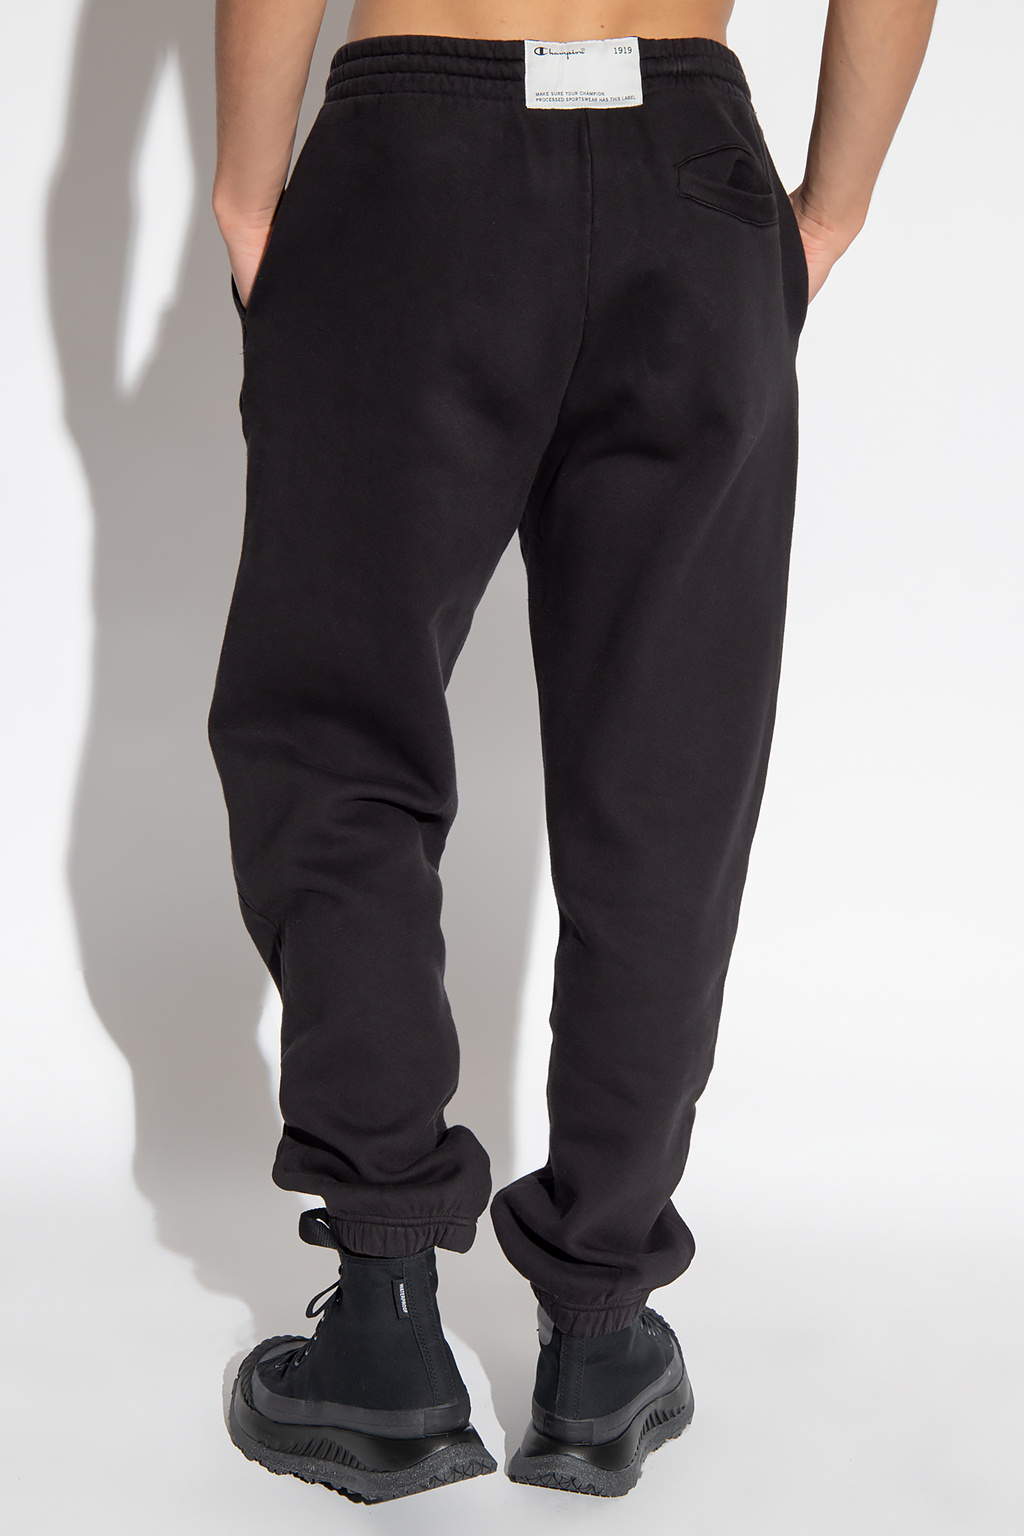 IetpShops Germany - Black Sweatpants with logo Champion - Jeans Boohoo homme